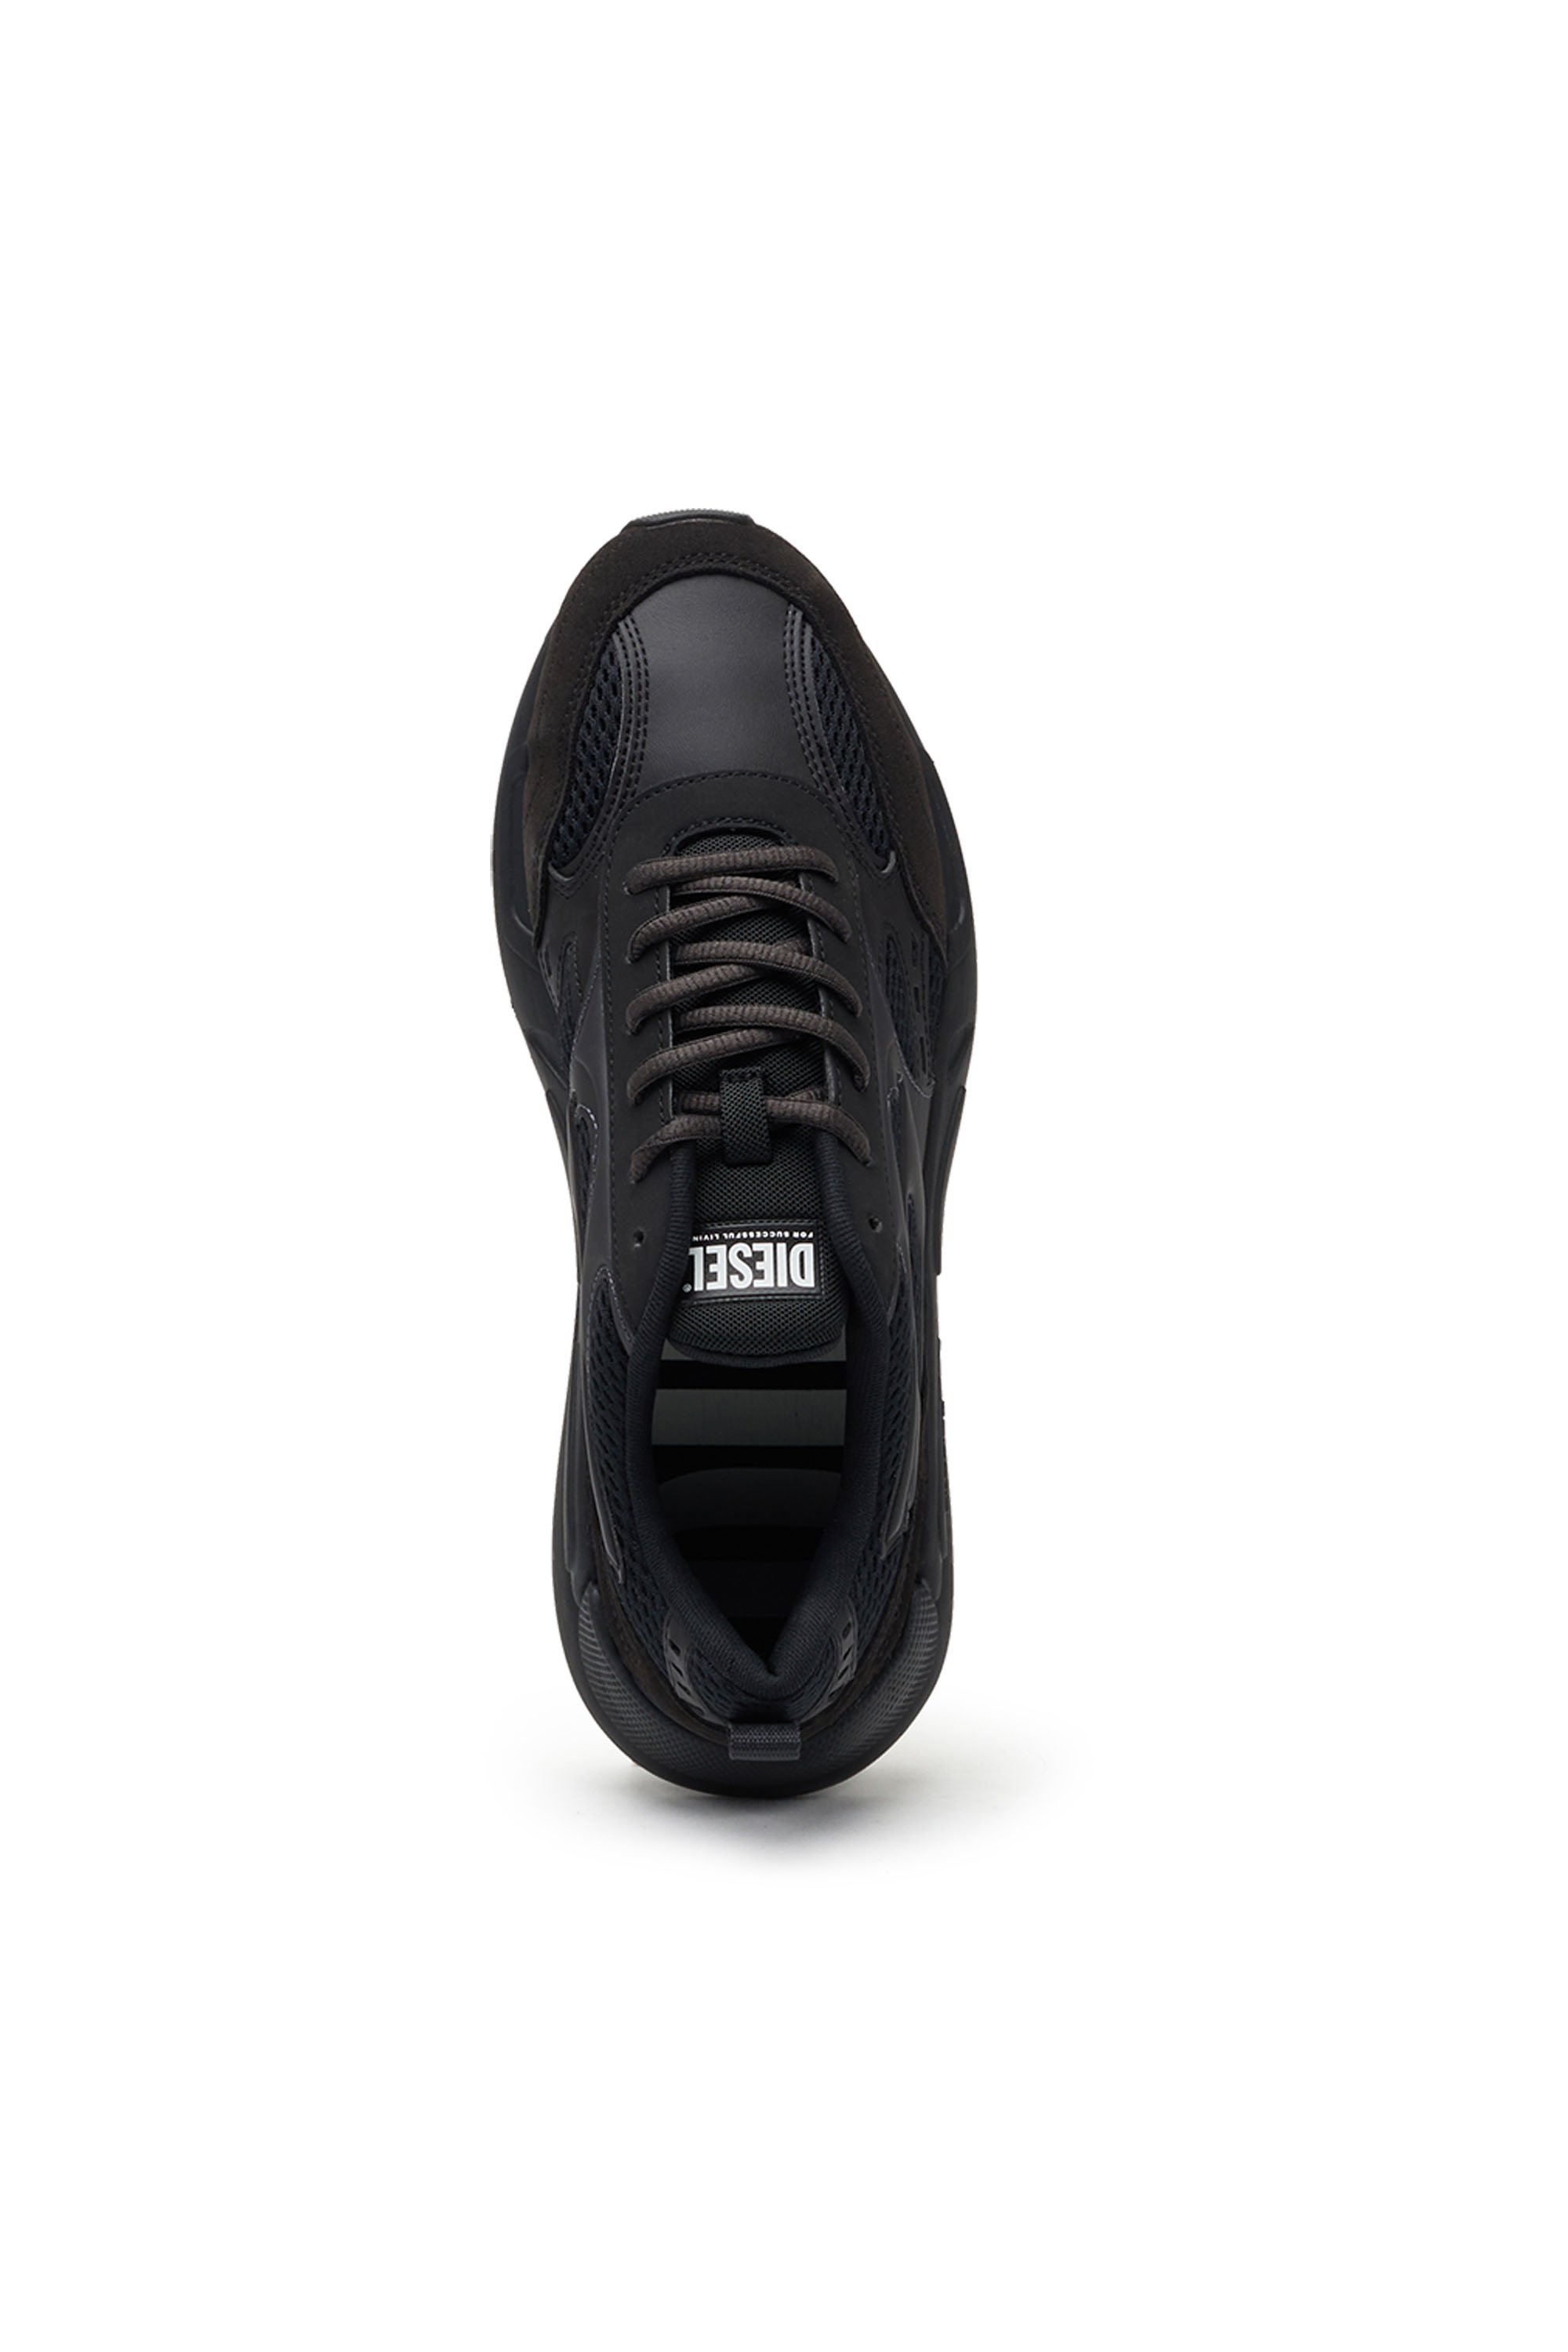 count up Executable inadvertently Men's New Shoes: Sneakers, Athletic Shoes & Boots | Diesel